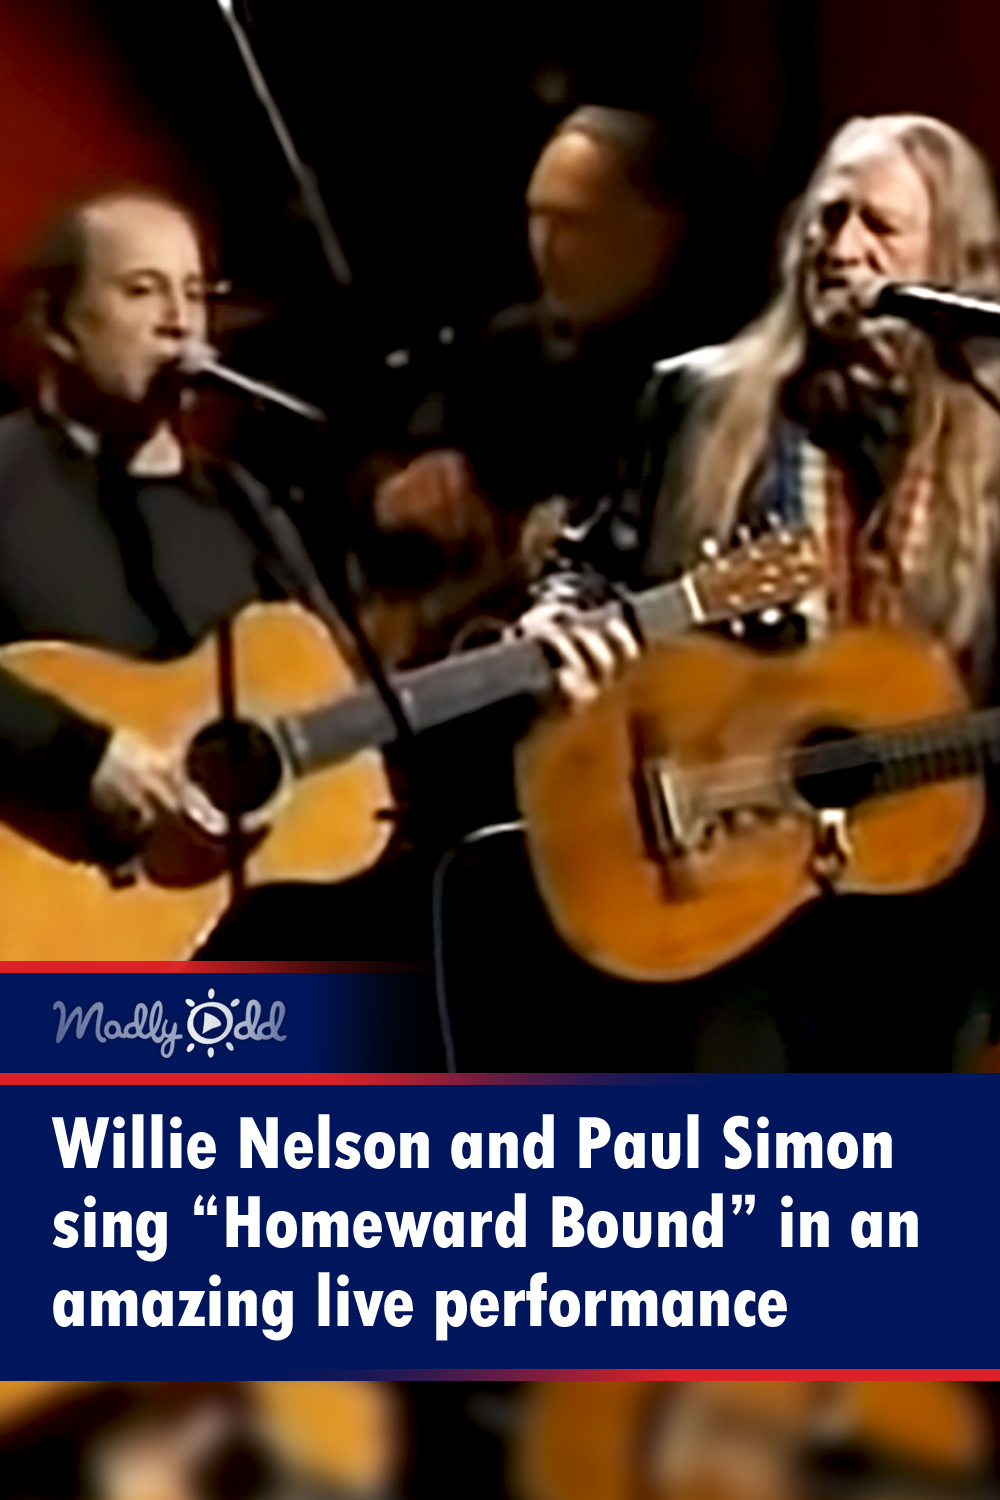 Willie Nelson and Paul Simon in an amazing performance of “Homeward Bound”